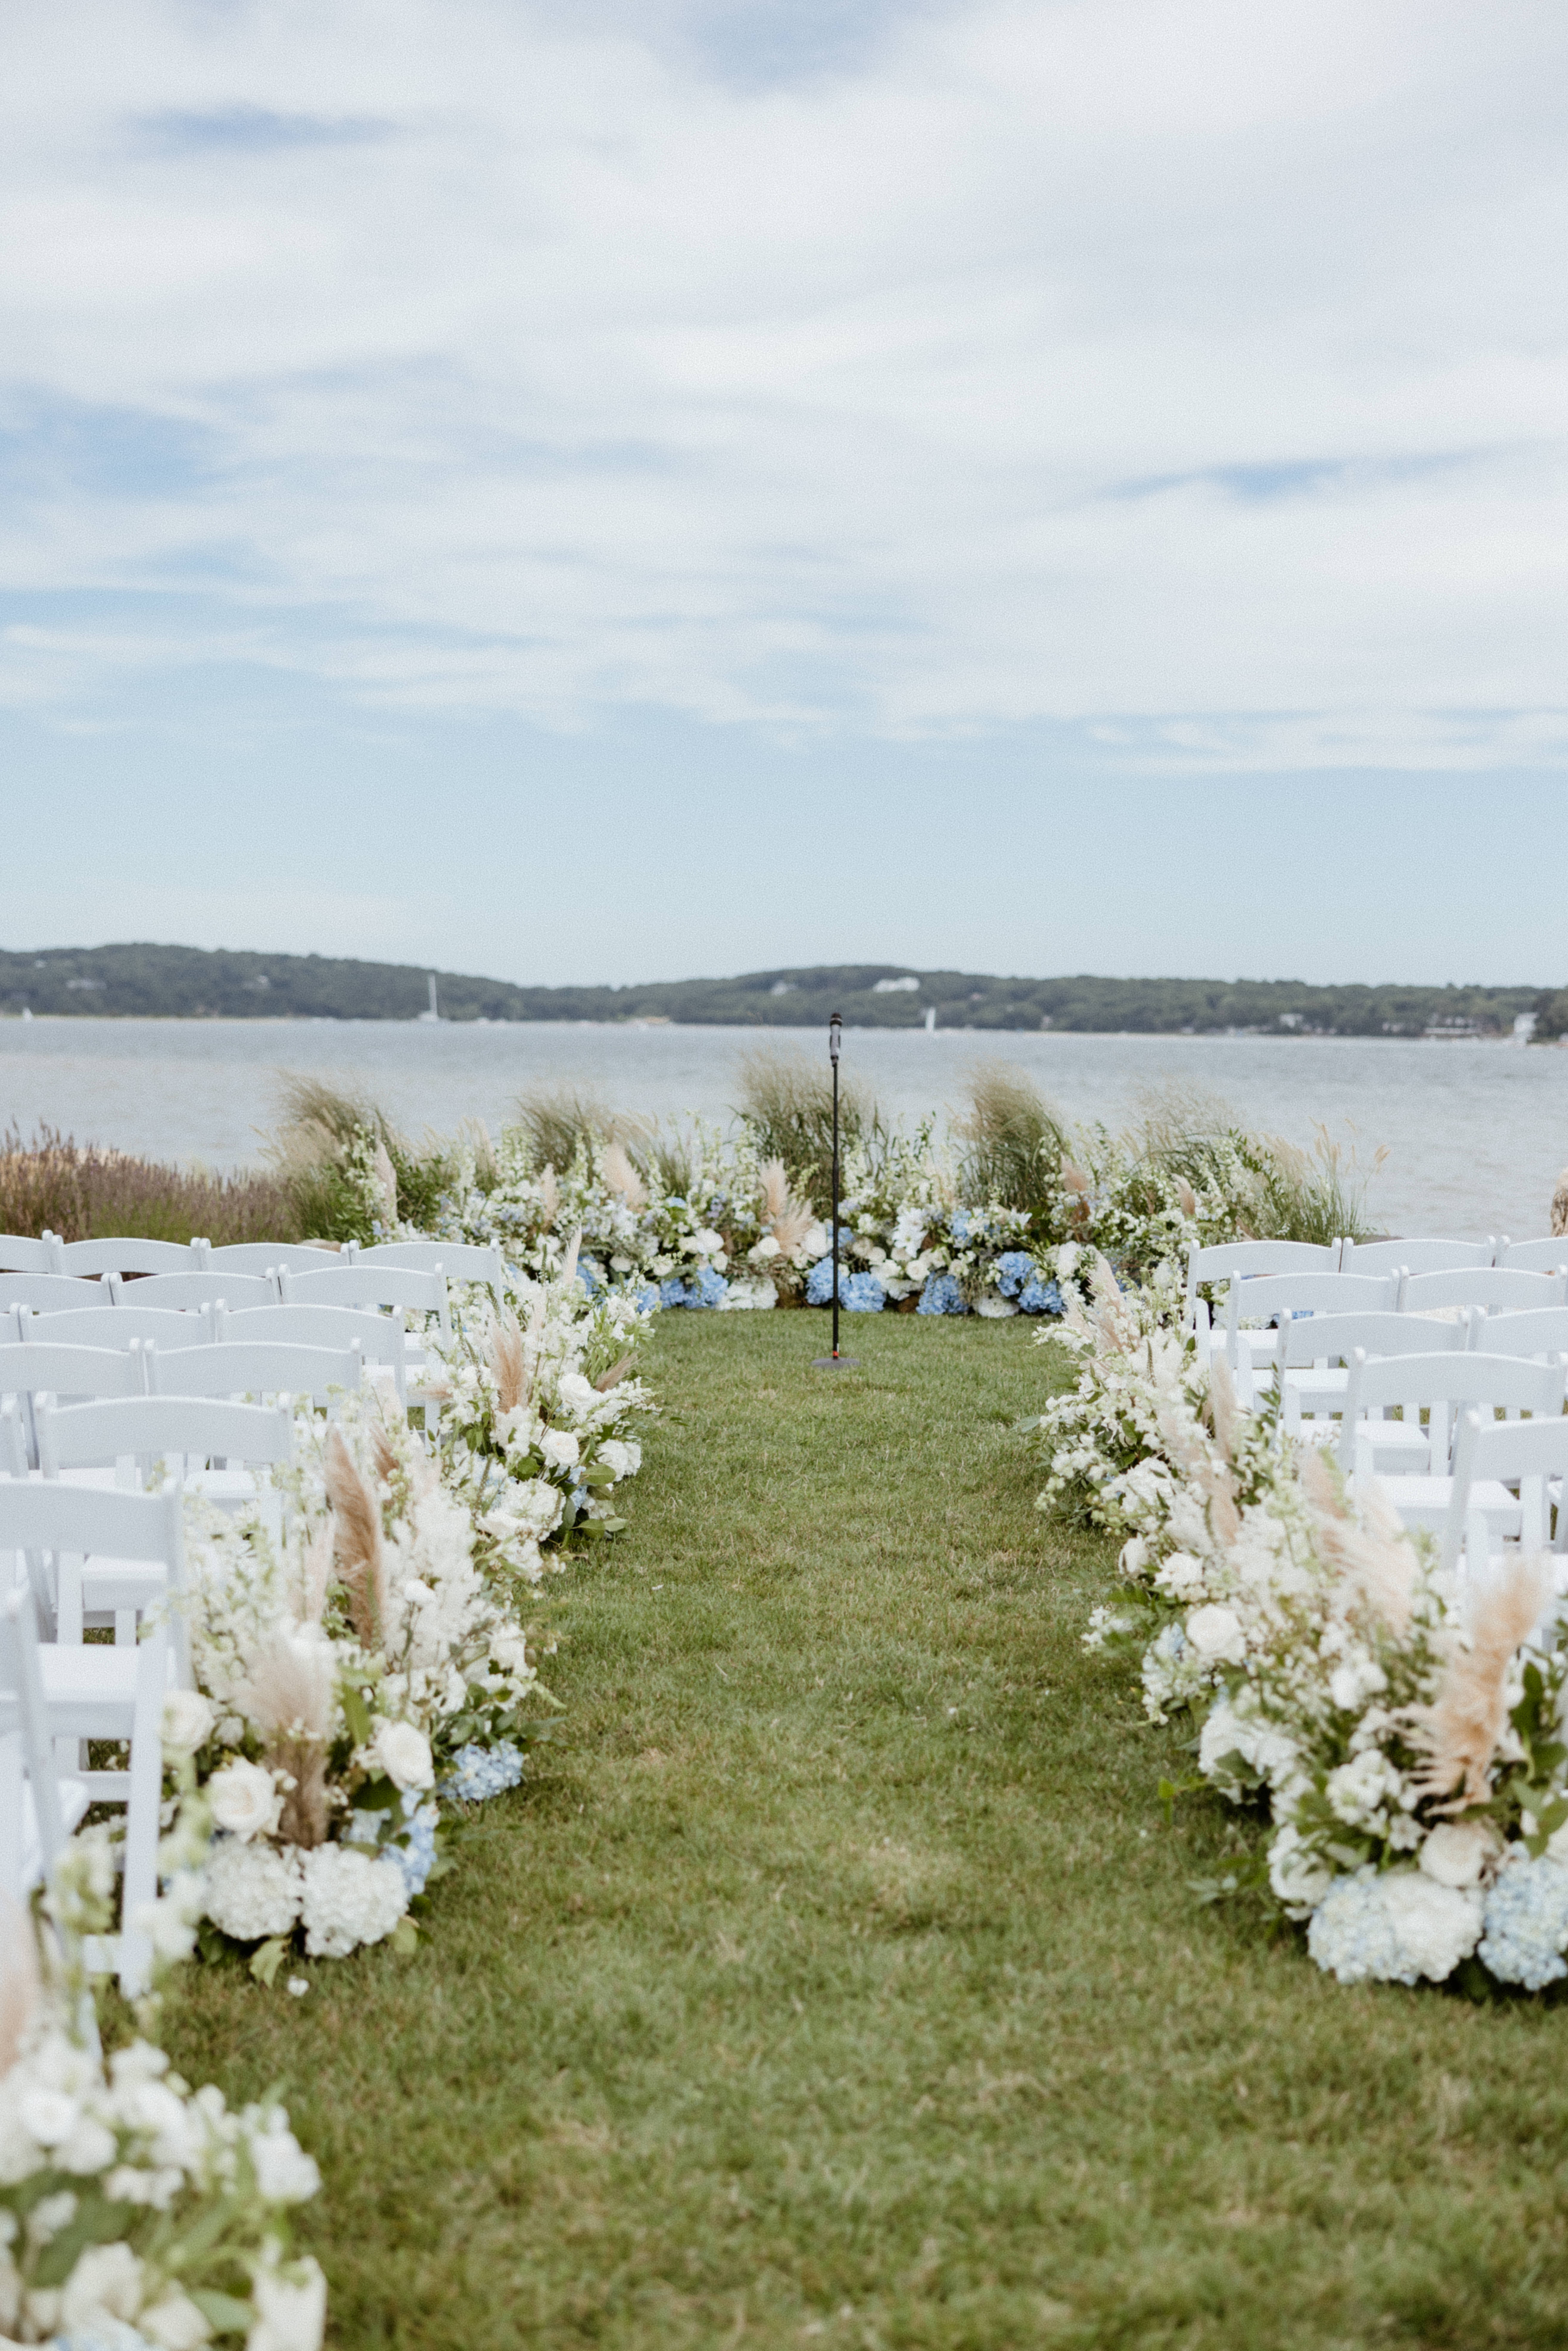 Stunning wedding ceremony site ready in front of the North east sea